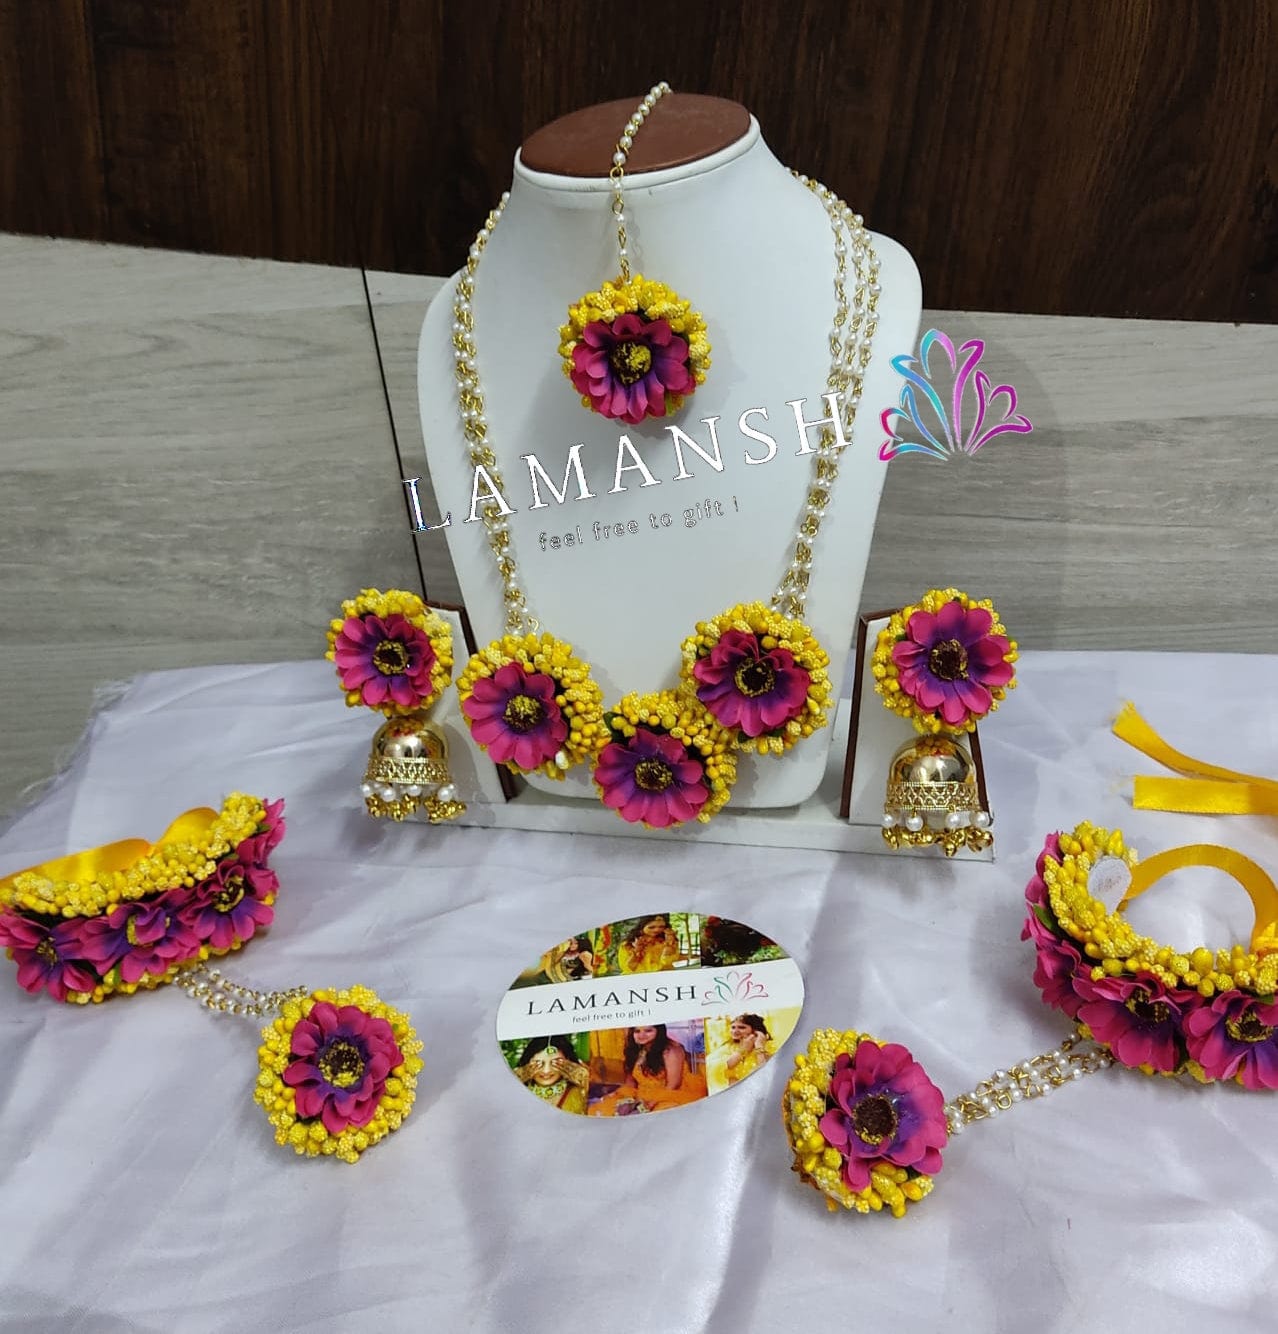 Lamansh Flower Jewellery Set 1 Necklace, 2 Jhumki Earrings , 1 Maangtika & 2 Bracelets attached with ring / Multicolor LAMANSH® All New Sunflower 🌻Collection Floral Jewellery Set For Women & Girls / Haldi Set